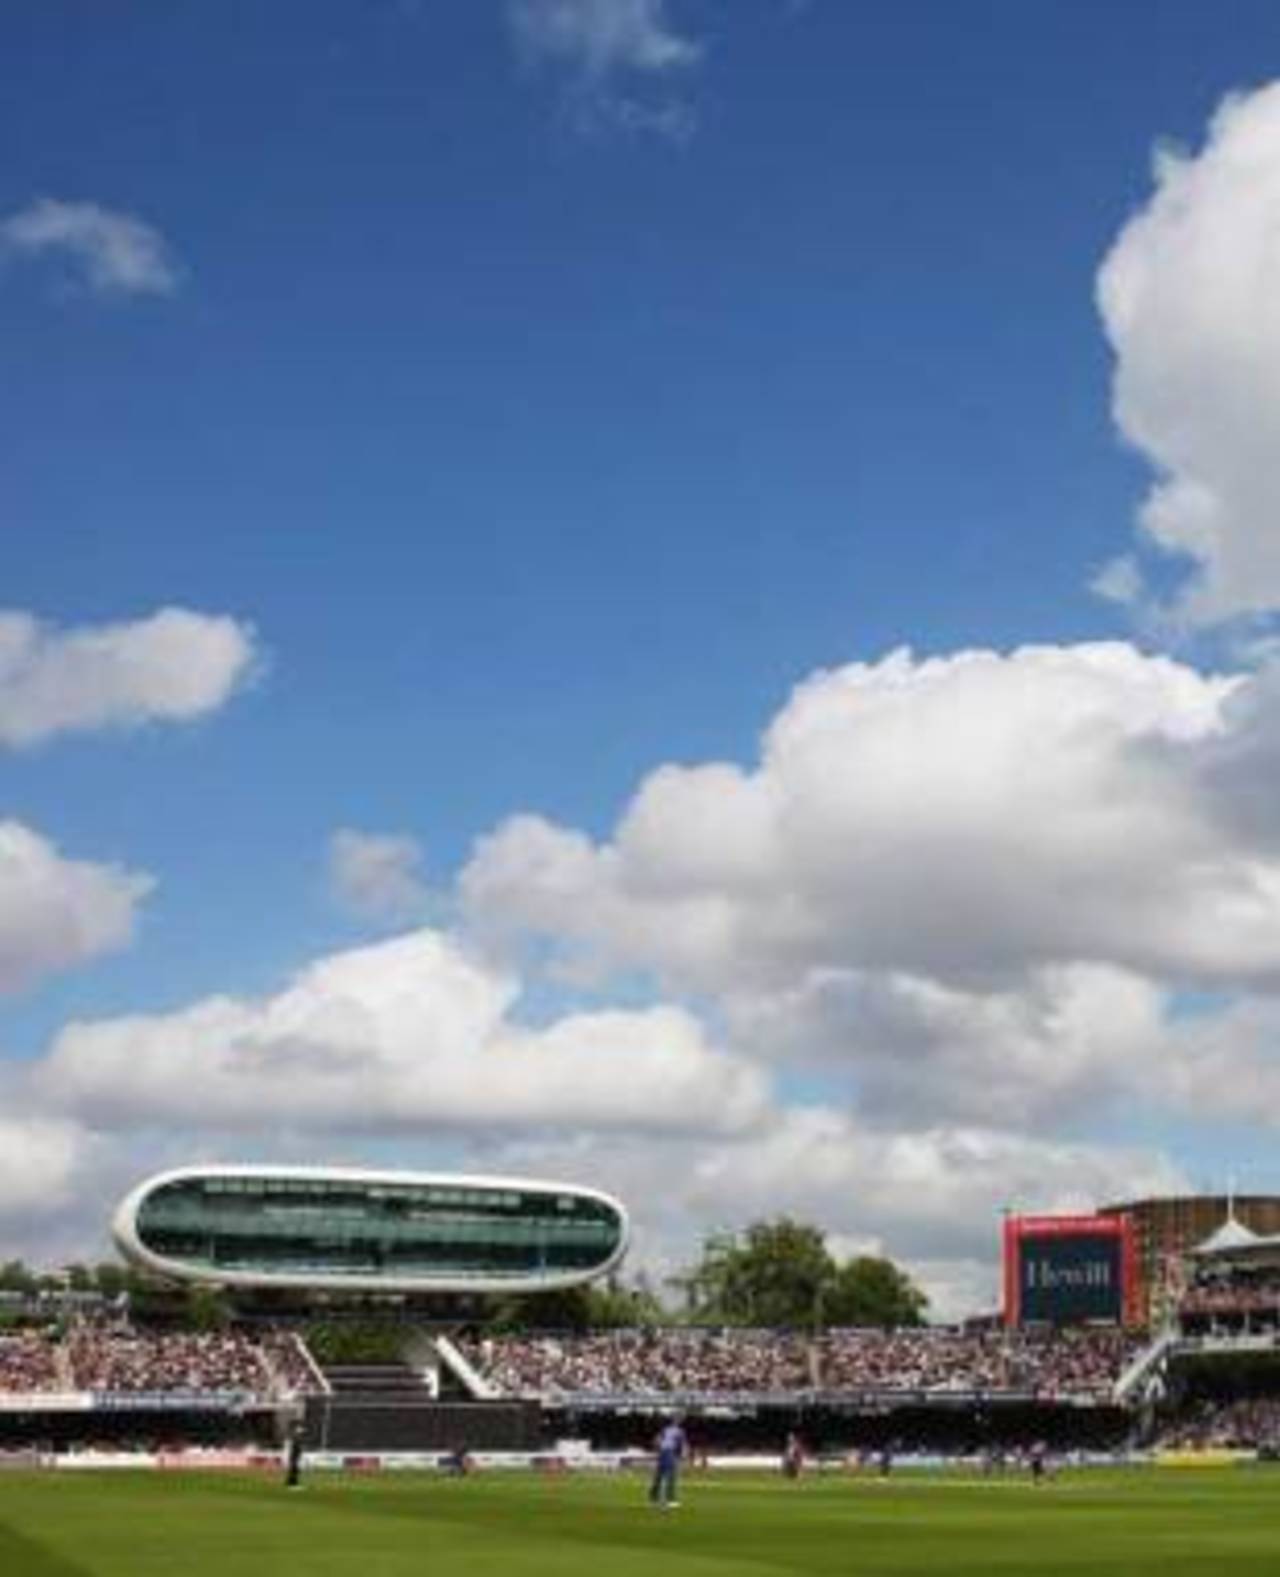 A general view during the first NatWest Series One Day International match between England and the West Indies at Lord's on July 1, 2007 in London, England